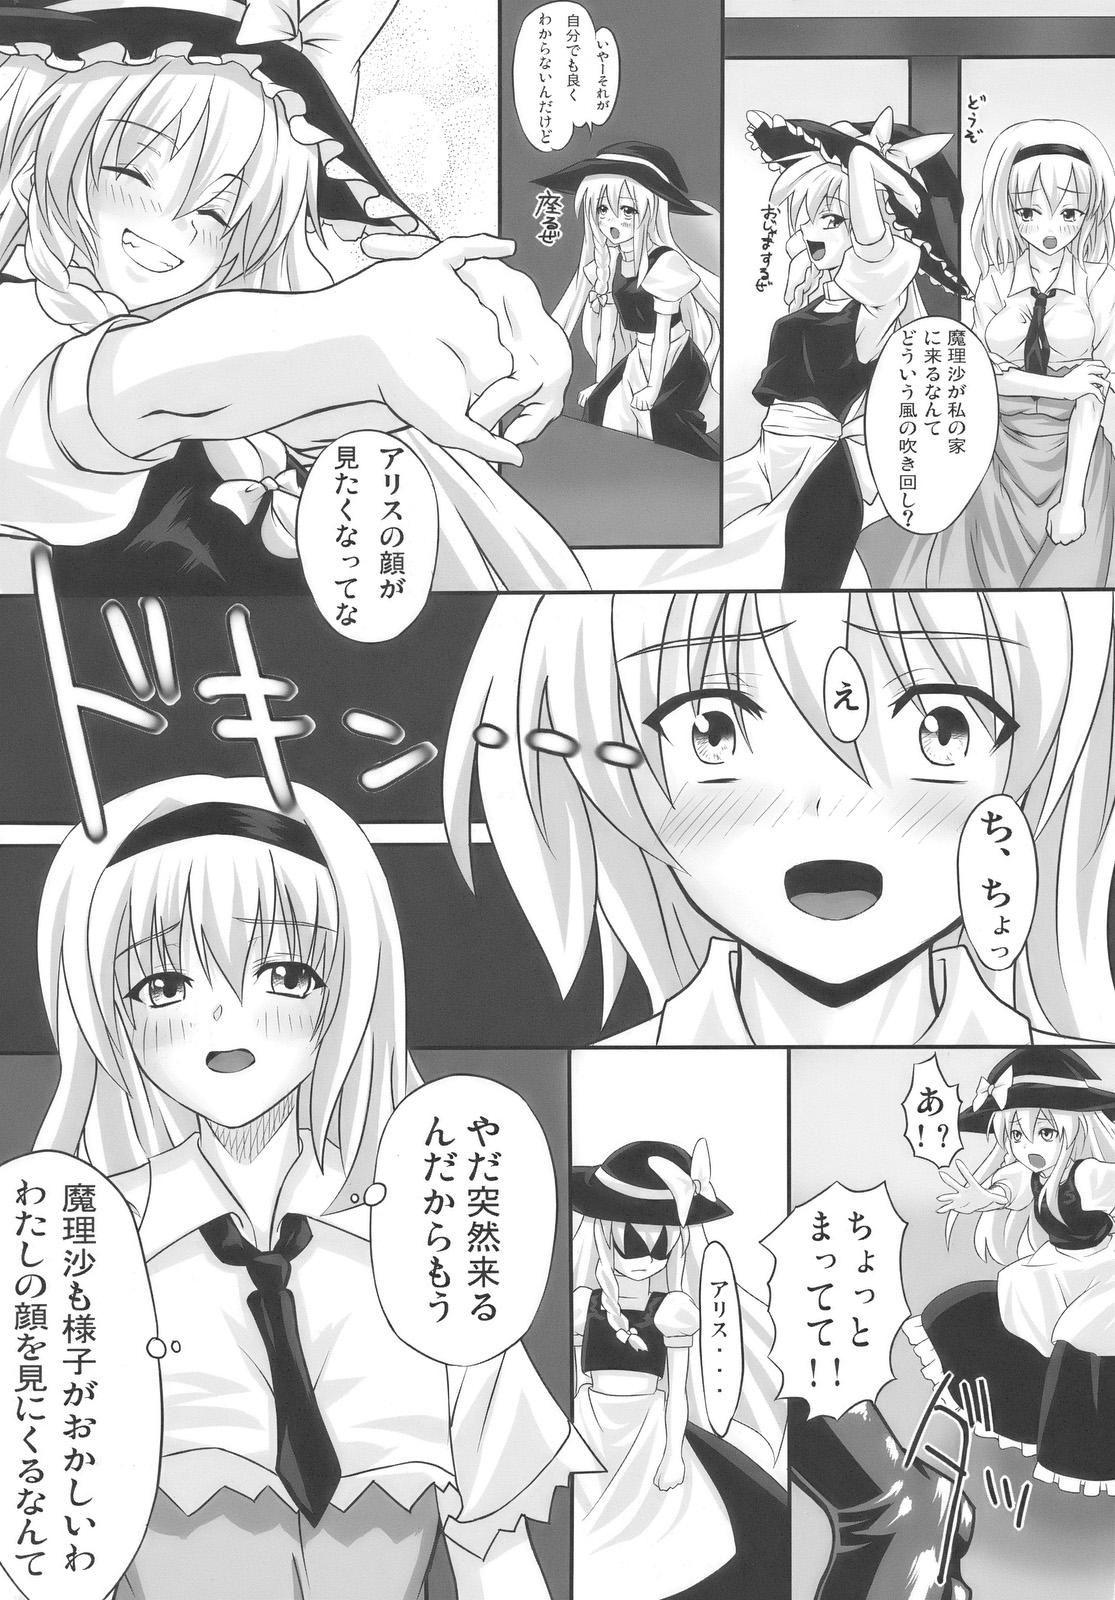 Shemales 東方相聞歌 - Touhou project Housewife - Page 5